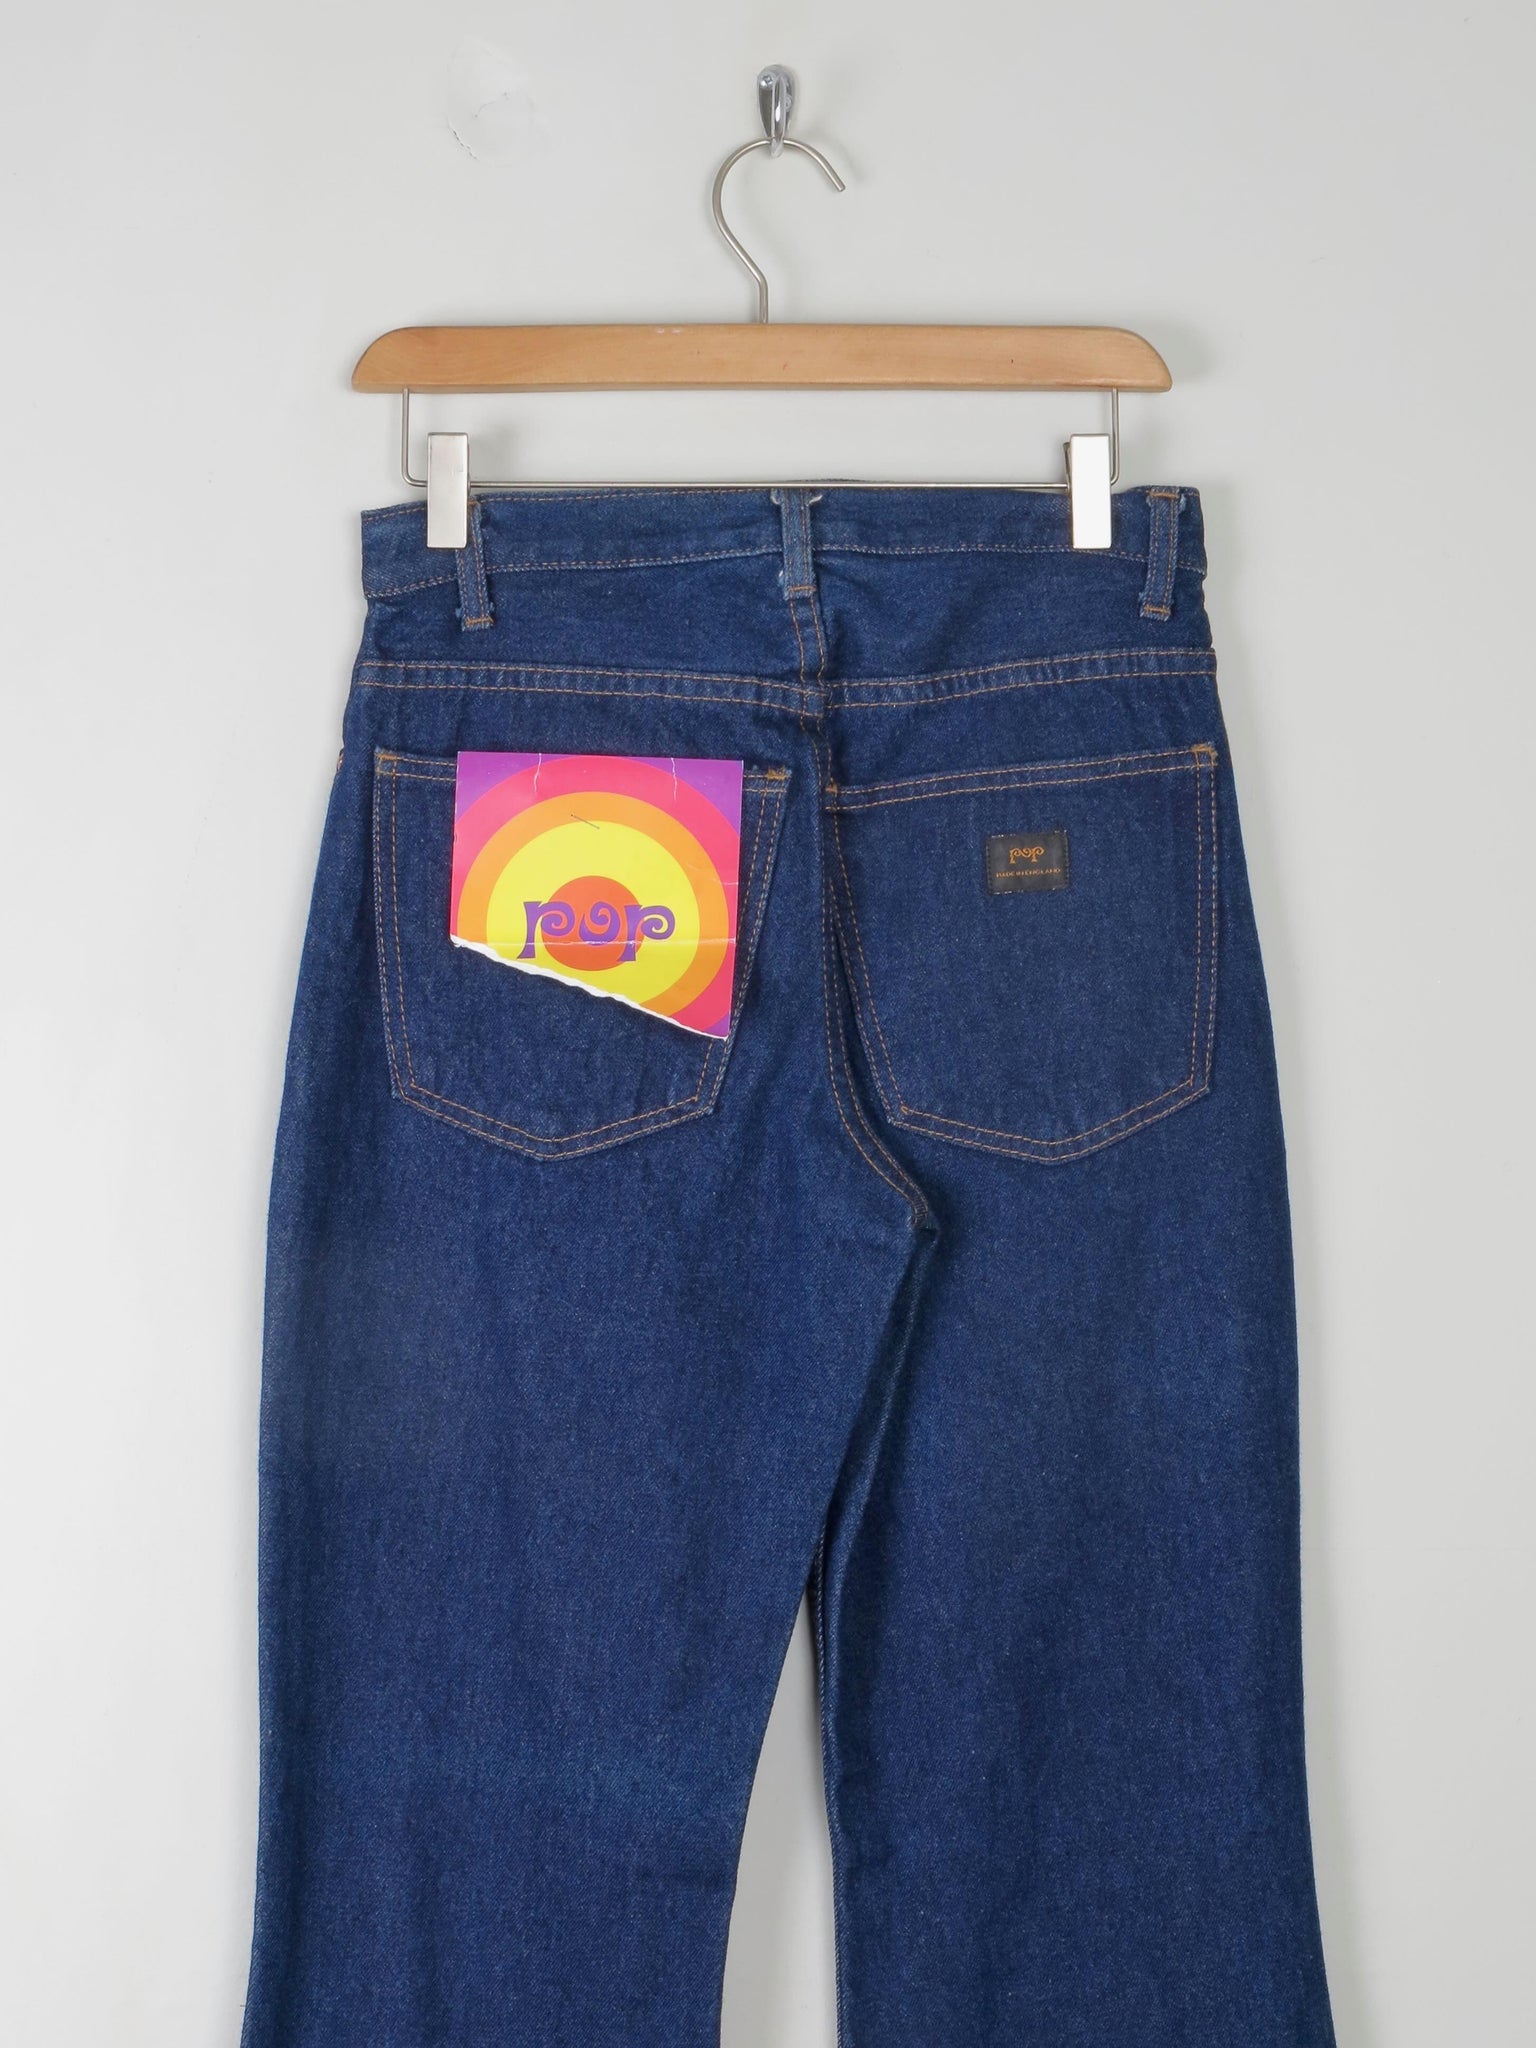 Vintage Style 90s Flared Bell Bottoms Pop Jeans 28"W /33 L - The Harlequin